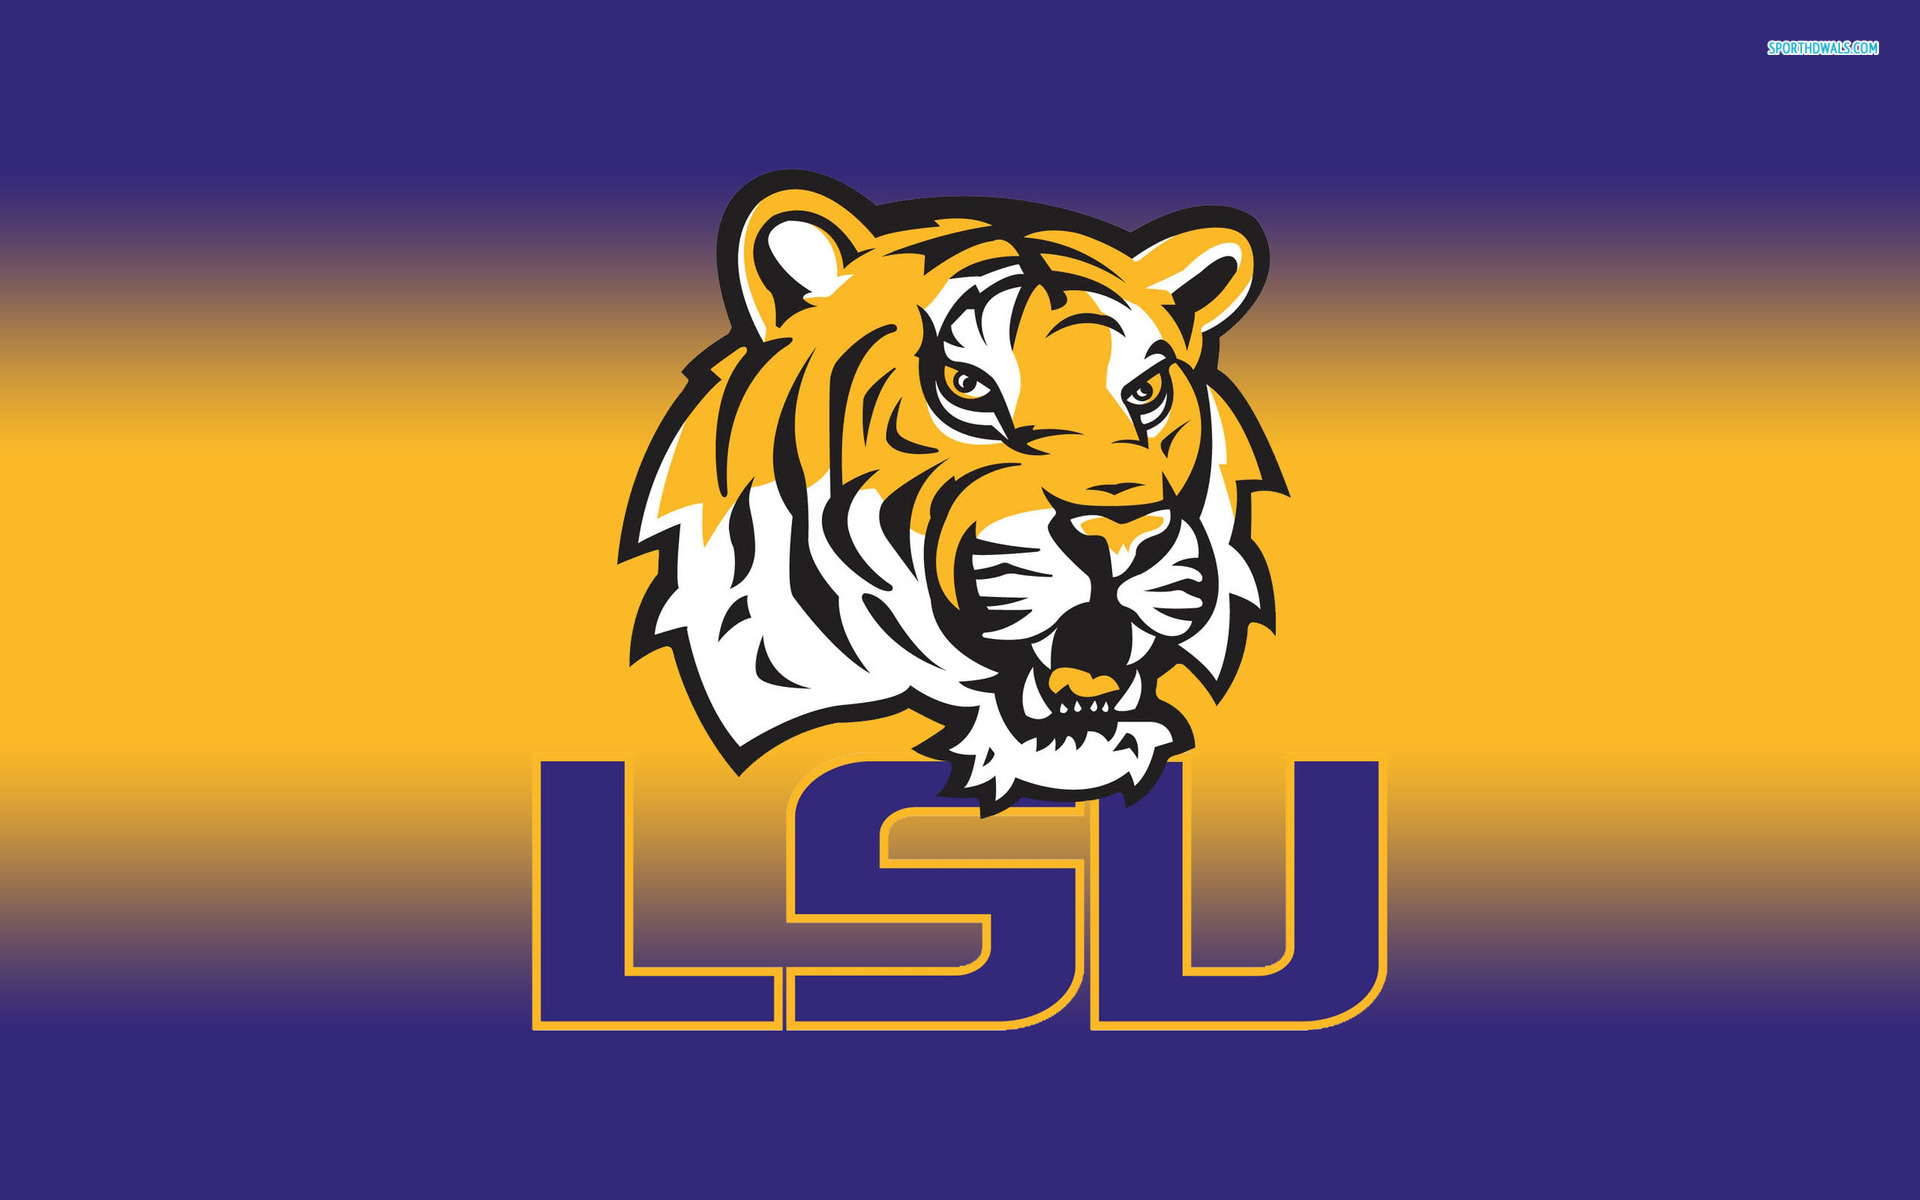 LSU Tigers wallpaper hd for computer | cute Wallpapers